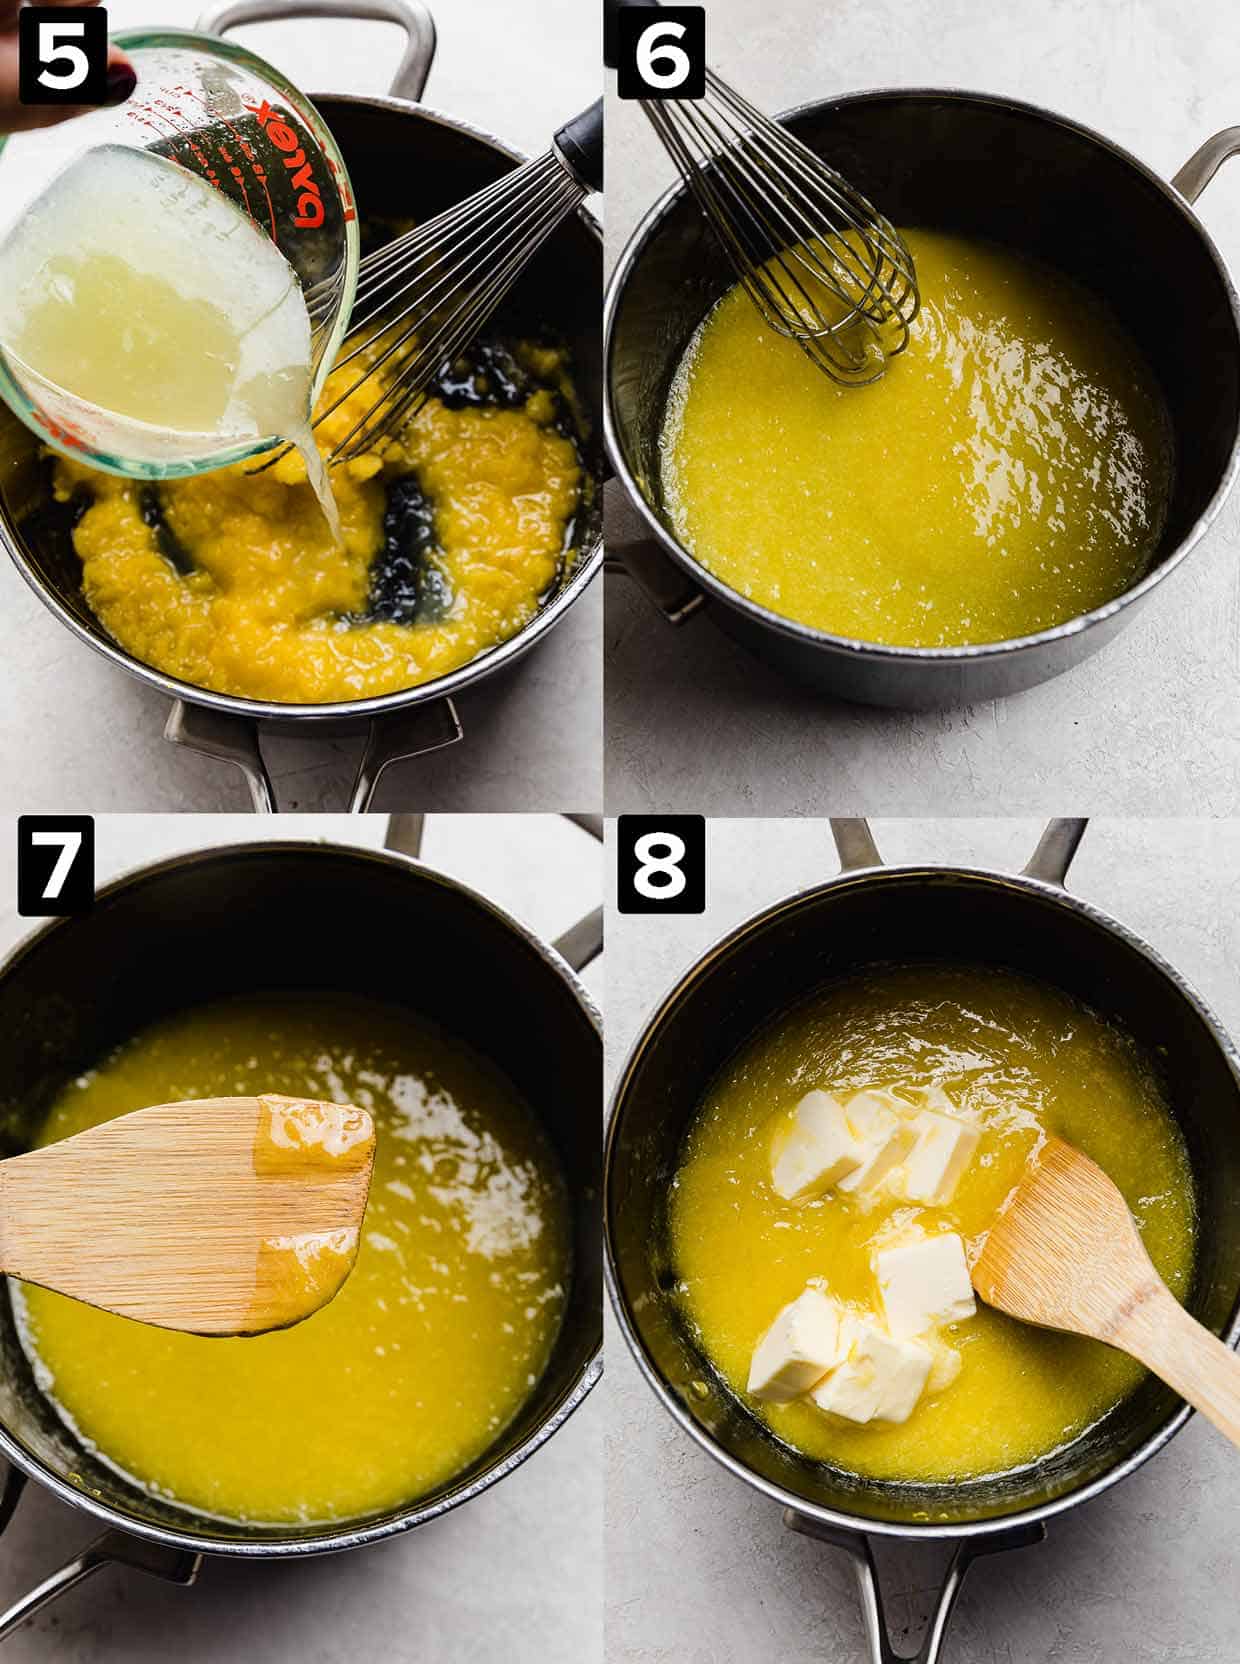 Four photos showing how to make lemon curd: lemon juice poured into a black pot, a whisk stirring the curd mixture, a wooden spoon with yellow lemon curd on it, and butter pieces in the lemon curd.